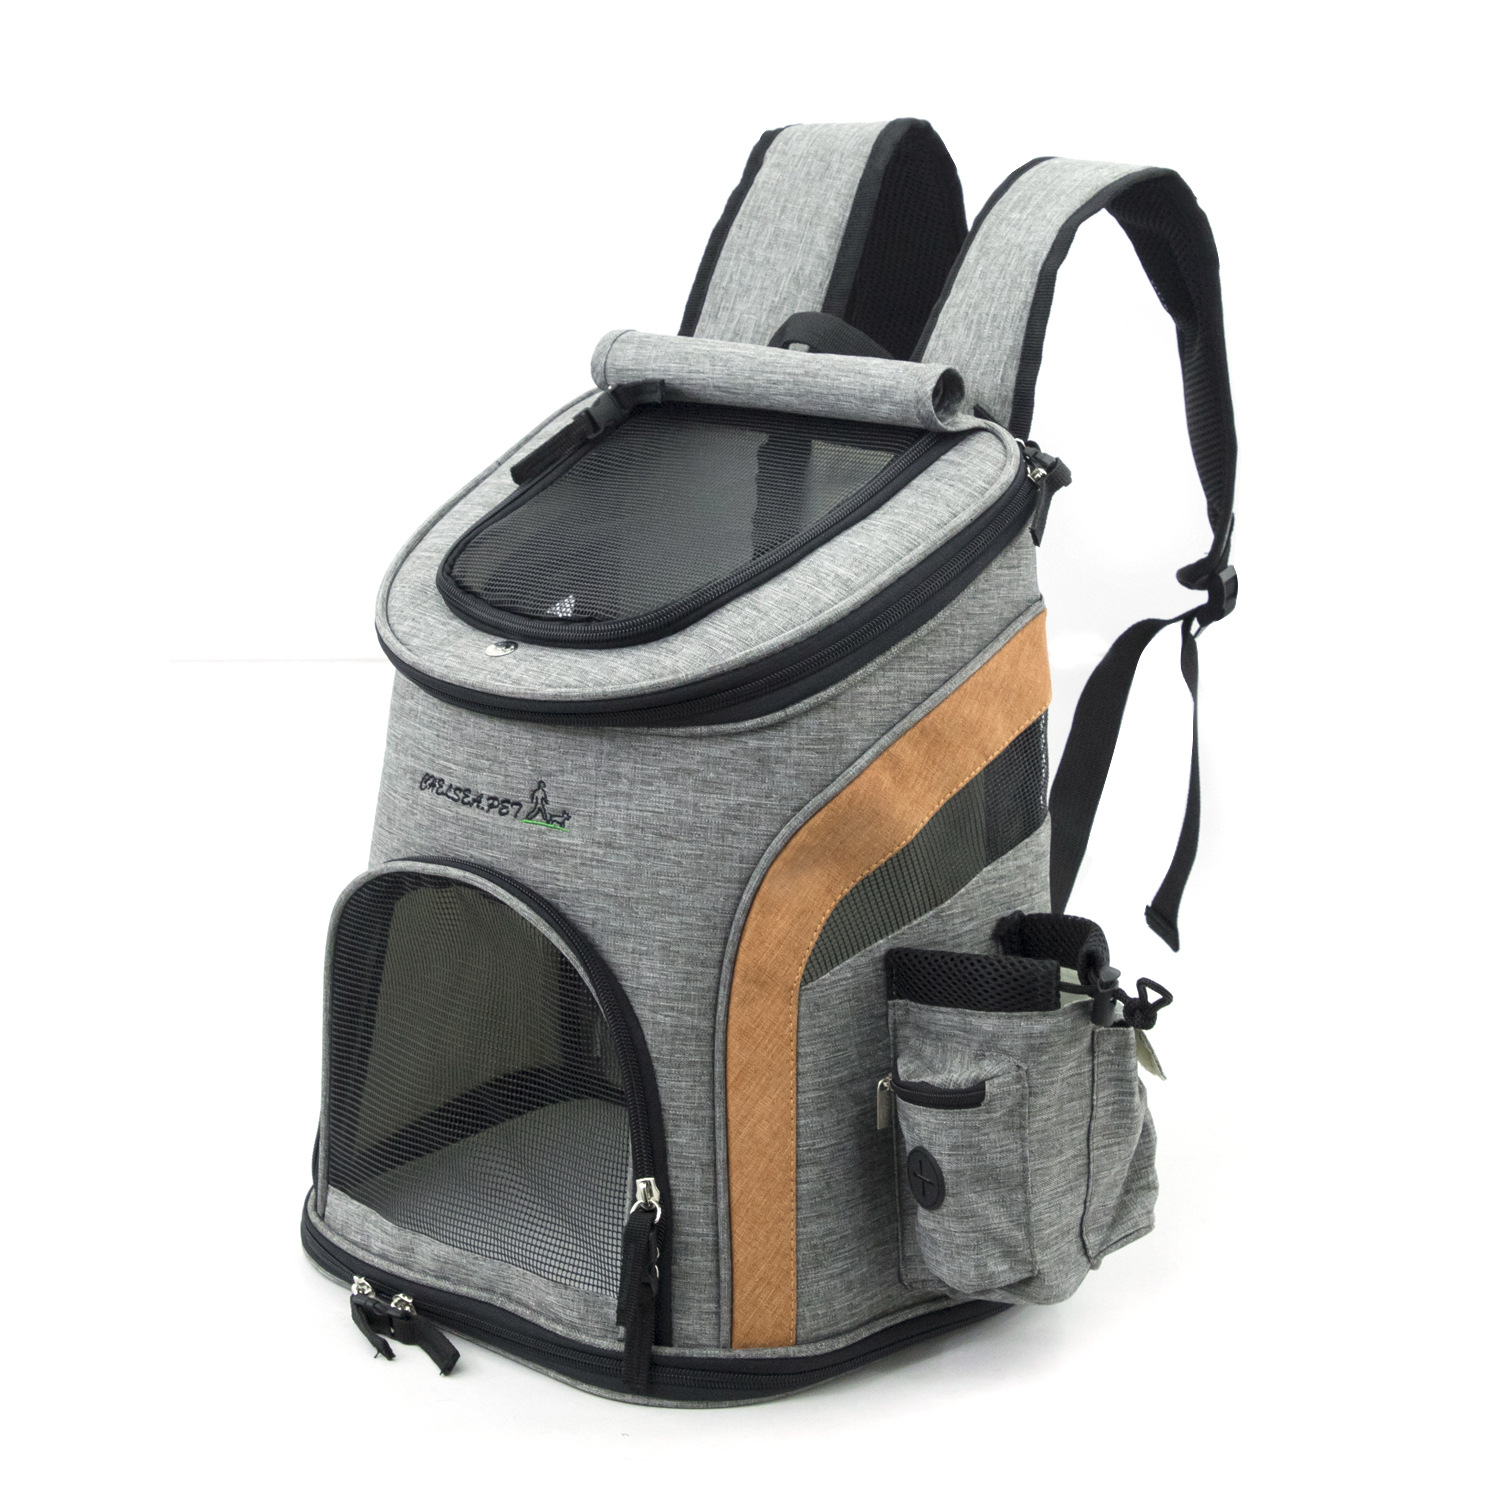 Mesh Breathable Outdoor Travel Pet Carrier Backpack